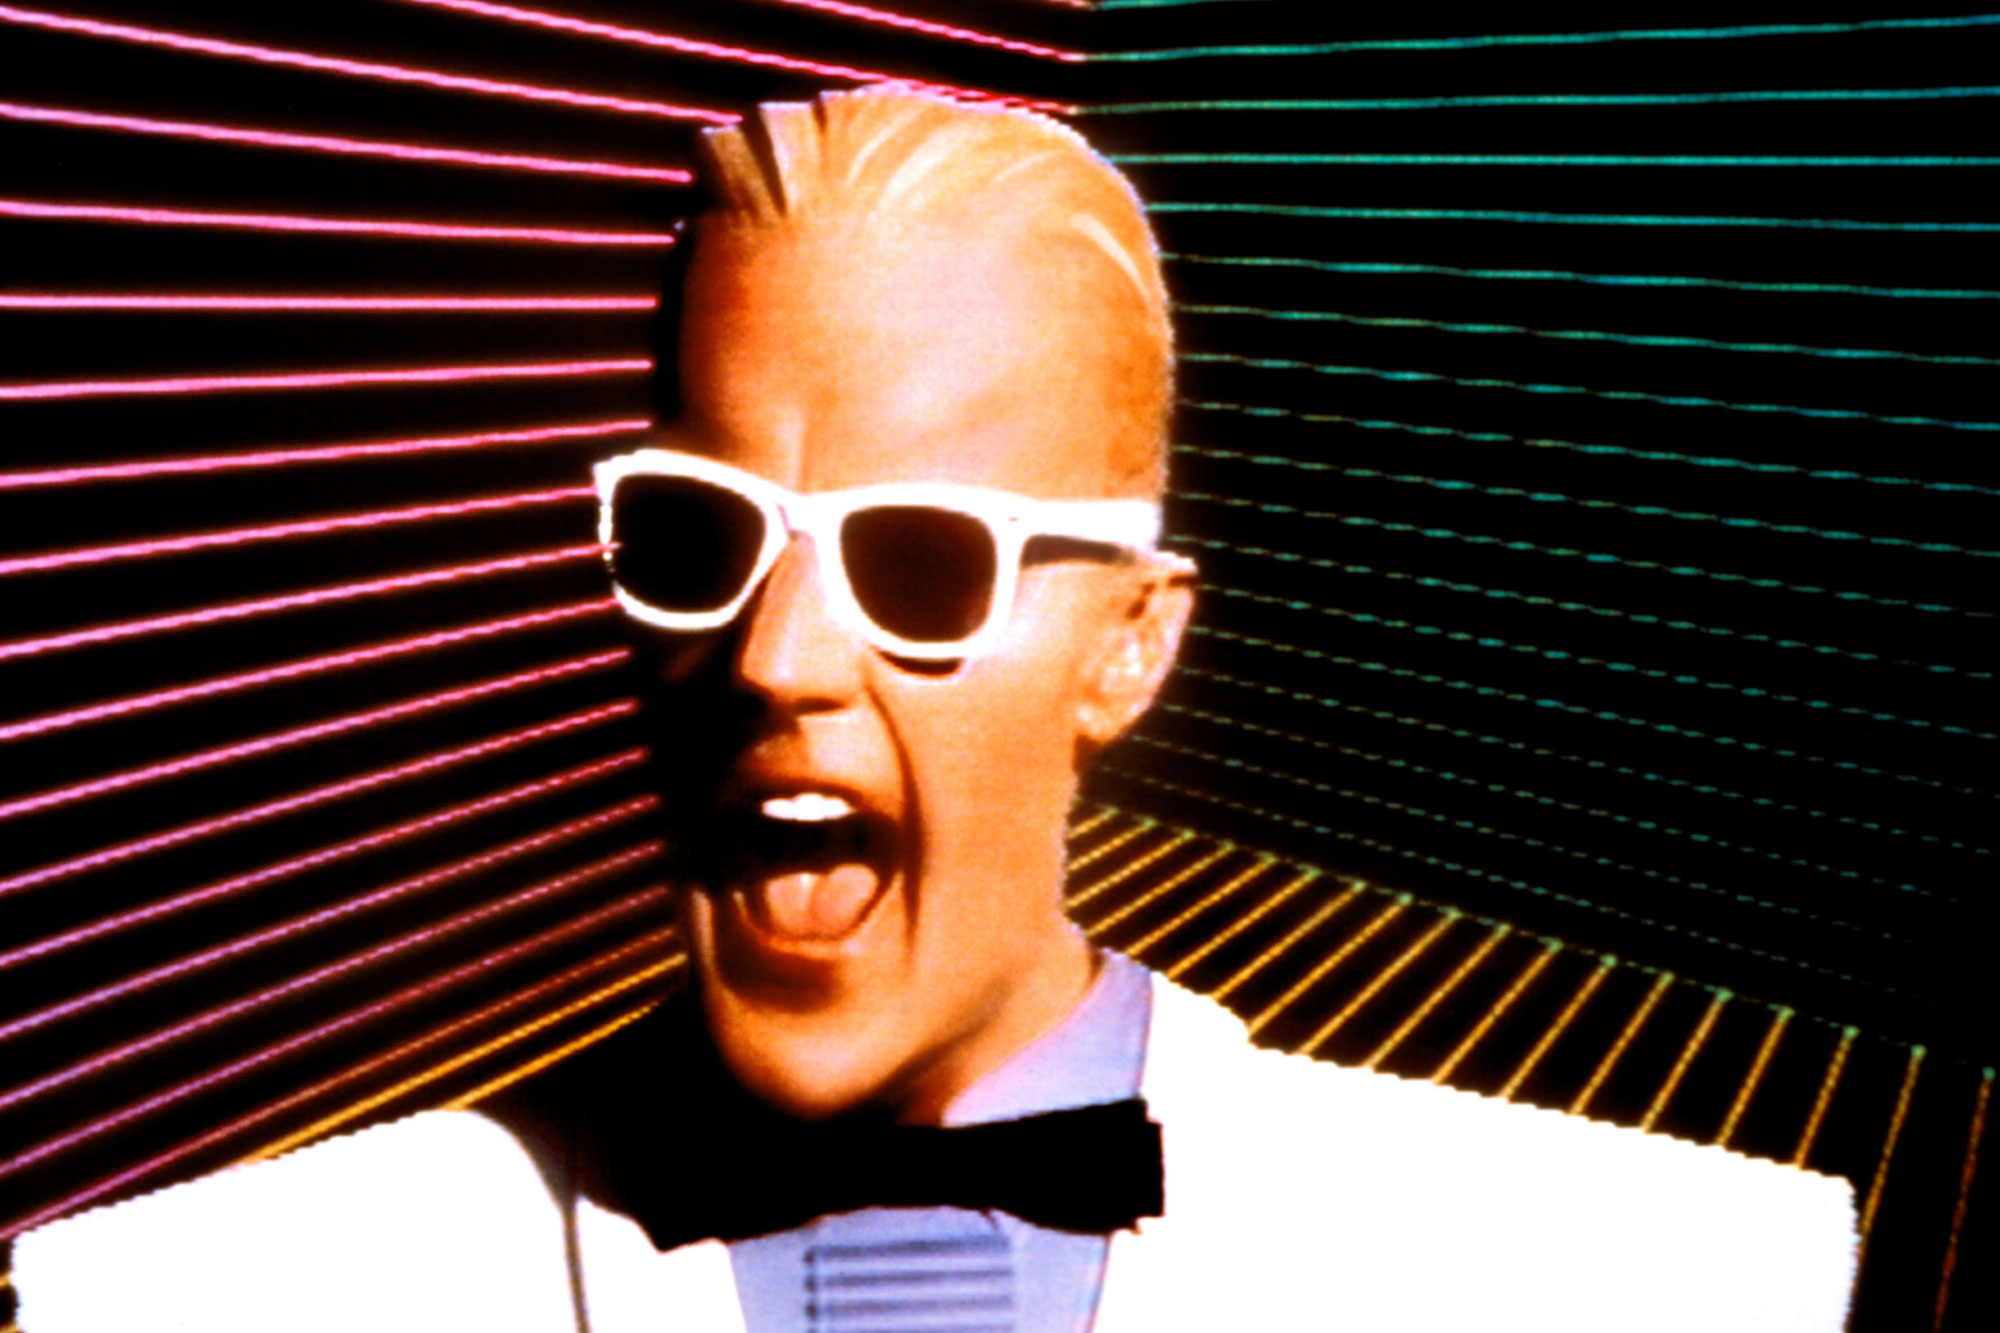 Image From Max Headroom (1987)